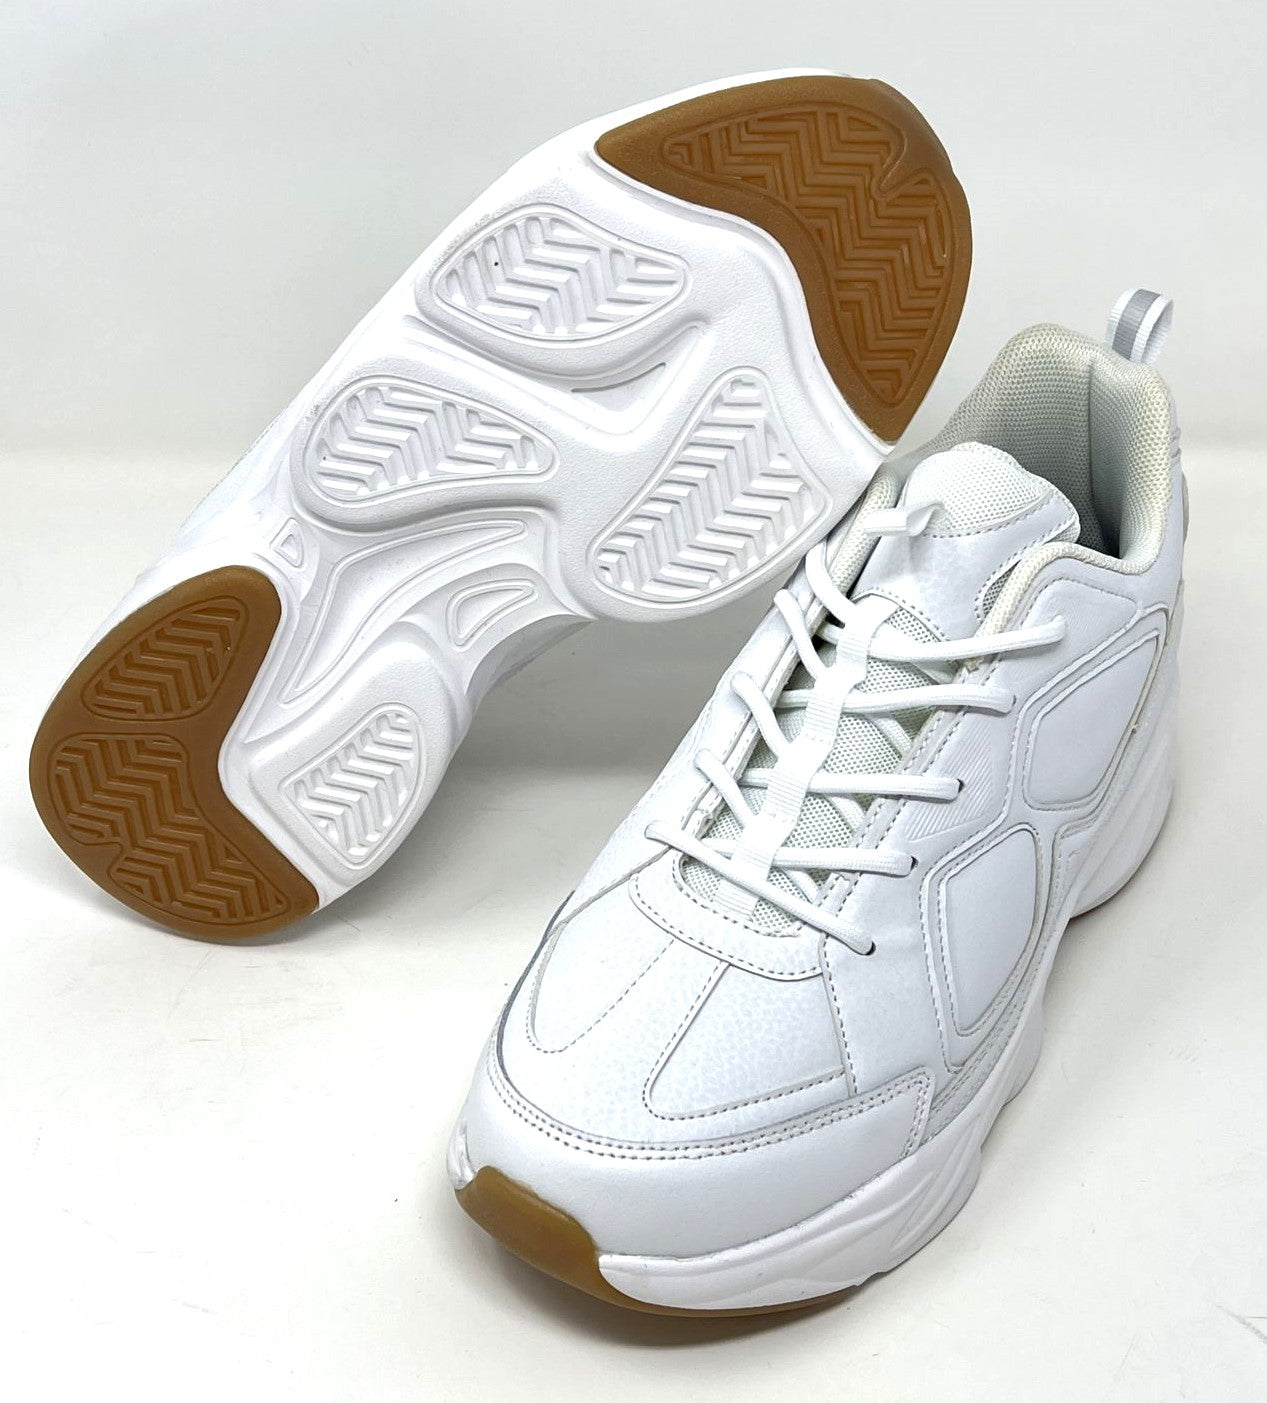 FSG0094 - 2.6 Inches Taller (White) - Size 9 Only